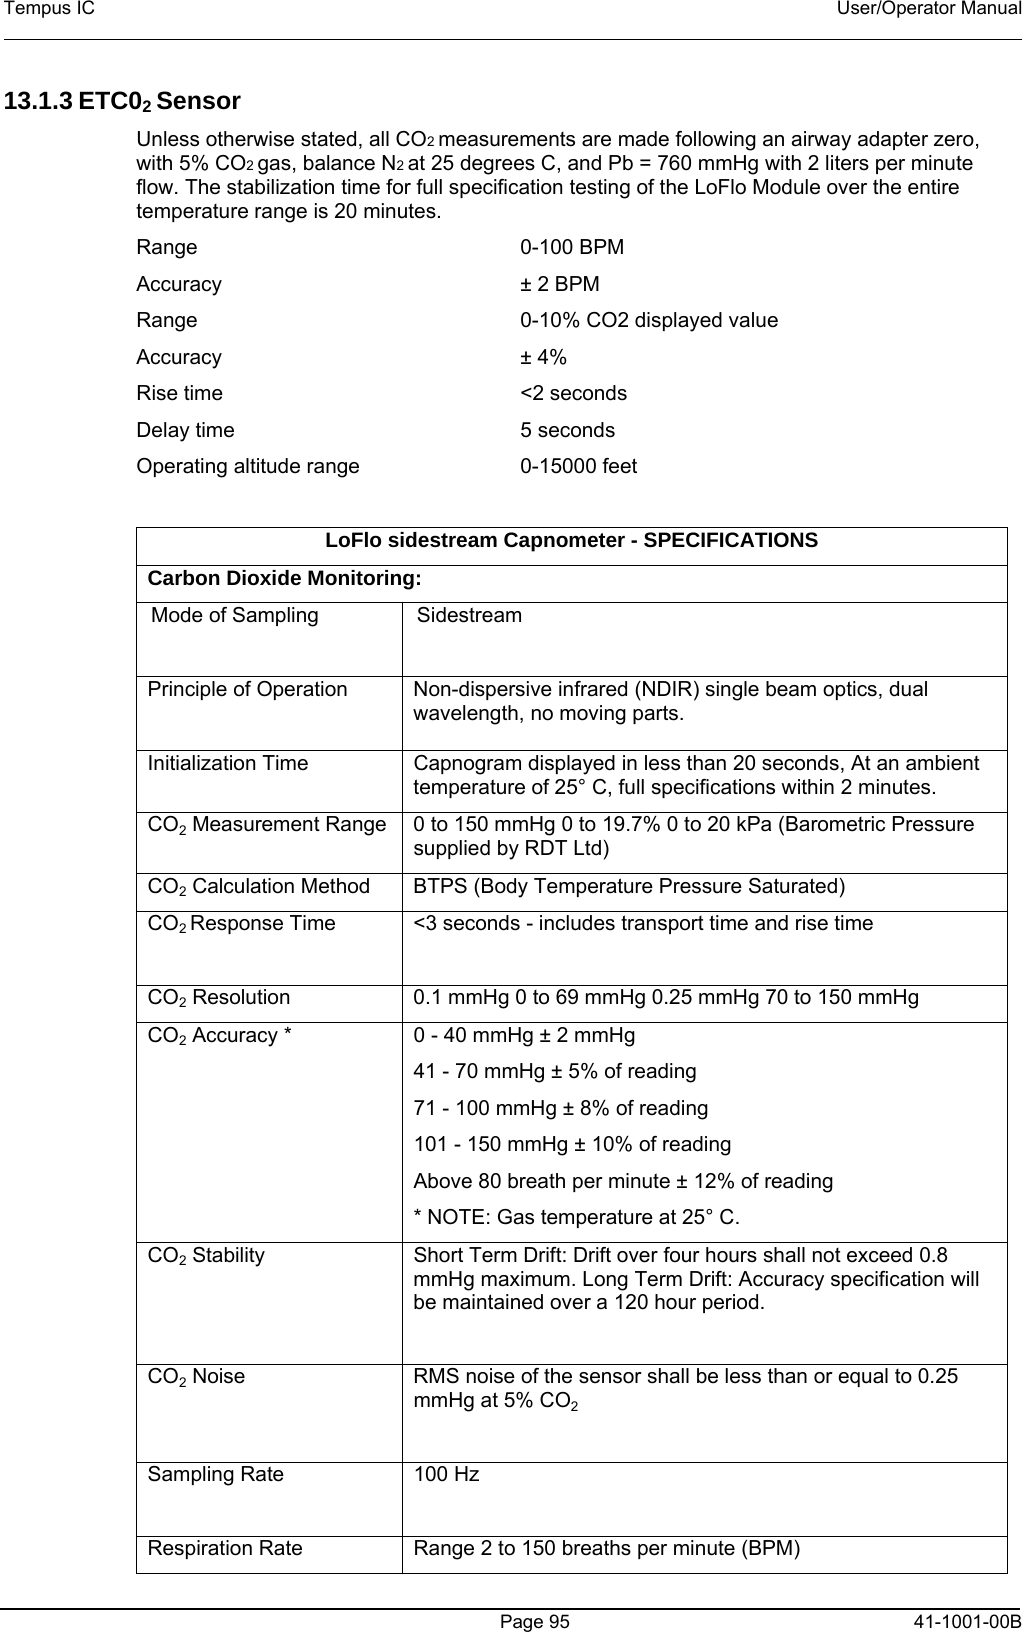 Tempus IC    User/Operator Manual      Page 95   41-1001-00B 13.1.3 ETC02 Sensor Unless otherwise stated, all CO2 measurements are made following an airway adapter zero, with 5% CO2 gas, balance N2 at 25 degrees C, and Pb = 760 mmHg with 2 liters per minute flow. The stabilization time for full specification testing of the LoFlo Module over the entire temperature range is 20 minutes. Range  0-100 BPM  Accuracy  ± 2 BPM Range  0-10% CO2 displayed value Accuracy  ± 4%  Rise time  &lt;2 seconds Delay time  5 seconds Operating altitude range  0-15000 feet   LoFlo sidestream Capnometer - SPECIFICATIONS Carbon Dioxide Monitoring: Mode of Sampling   Sidestream Principle of Operation   Non-dispersive infrared (NDIR) single beam optics, dual wavelength, no moving parts. Initialization Time  Capnogram displayed in less than 20 seconds, At an ambient temperature of 25° C, full specifications within 2 minutes. CO2 Measurement Range  0 to 150 mmHg 0 to 19.7% 0 to 20 kPa (Barometric Pressure supplied by RDT Ltd) CO2 Calculation Method  BTPS (Body Temperature Pressure Saturated) CO2 Response Time  &lt;3 seconds - includes transport time and rise time  CO2 Resolution  0.1 mmHg 0 to 69 mmHg 0.25 mmHg 70 to 150 mmHg CO2 Accuracy *  0 - 40 mmHg ± 2 mmHg 41 - 70 mmHg ± 5% of reading 71 - 100 mmHg ± 8% of reading 101 - 150 mmHg ± 10% of reading Above 80 breath per minute ± 12% of reading * NOTE: Gas temperature at 25° C. CO2 Stability  Short Term Drift: Drift over four hours shall not exceed 0.8 mmHg maximum. Long Term Drift: Accuracy specification will be maintained over a 120 hour period.  CO2 Noise  RMS noise of the sensor shall be less than or equal to 0.25 mmHg at 5% CO2  Sampling Rate  100 Hz  Respiration Rate  Range 2 to 150 breaths per minute (BPM) 